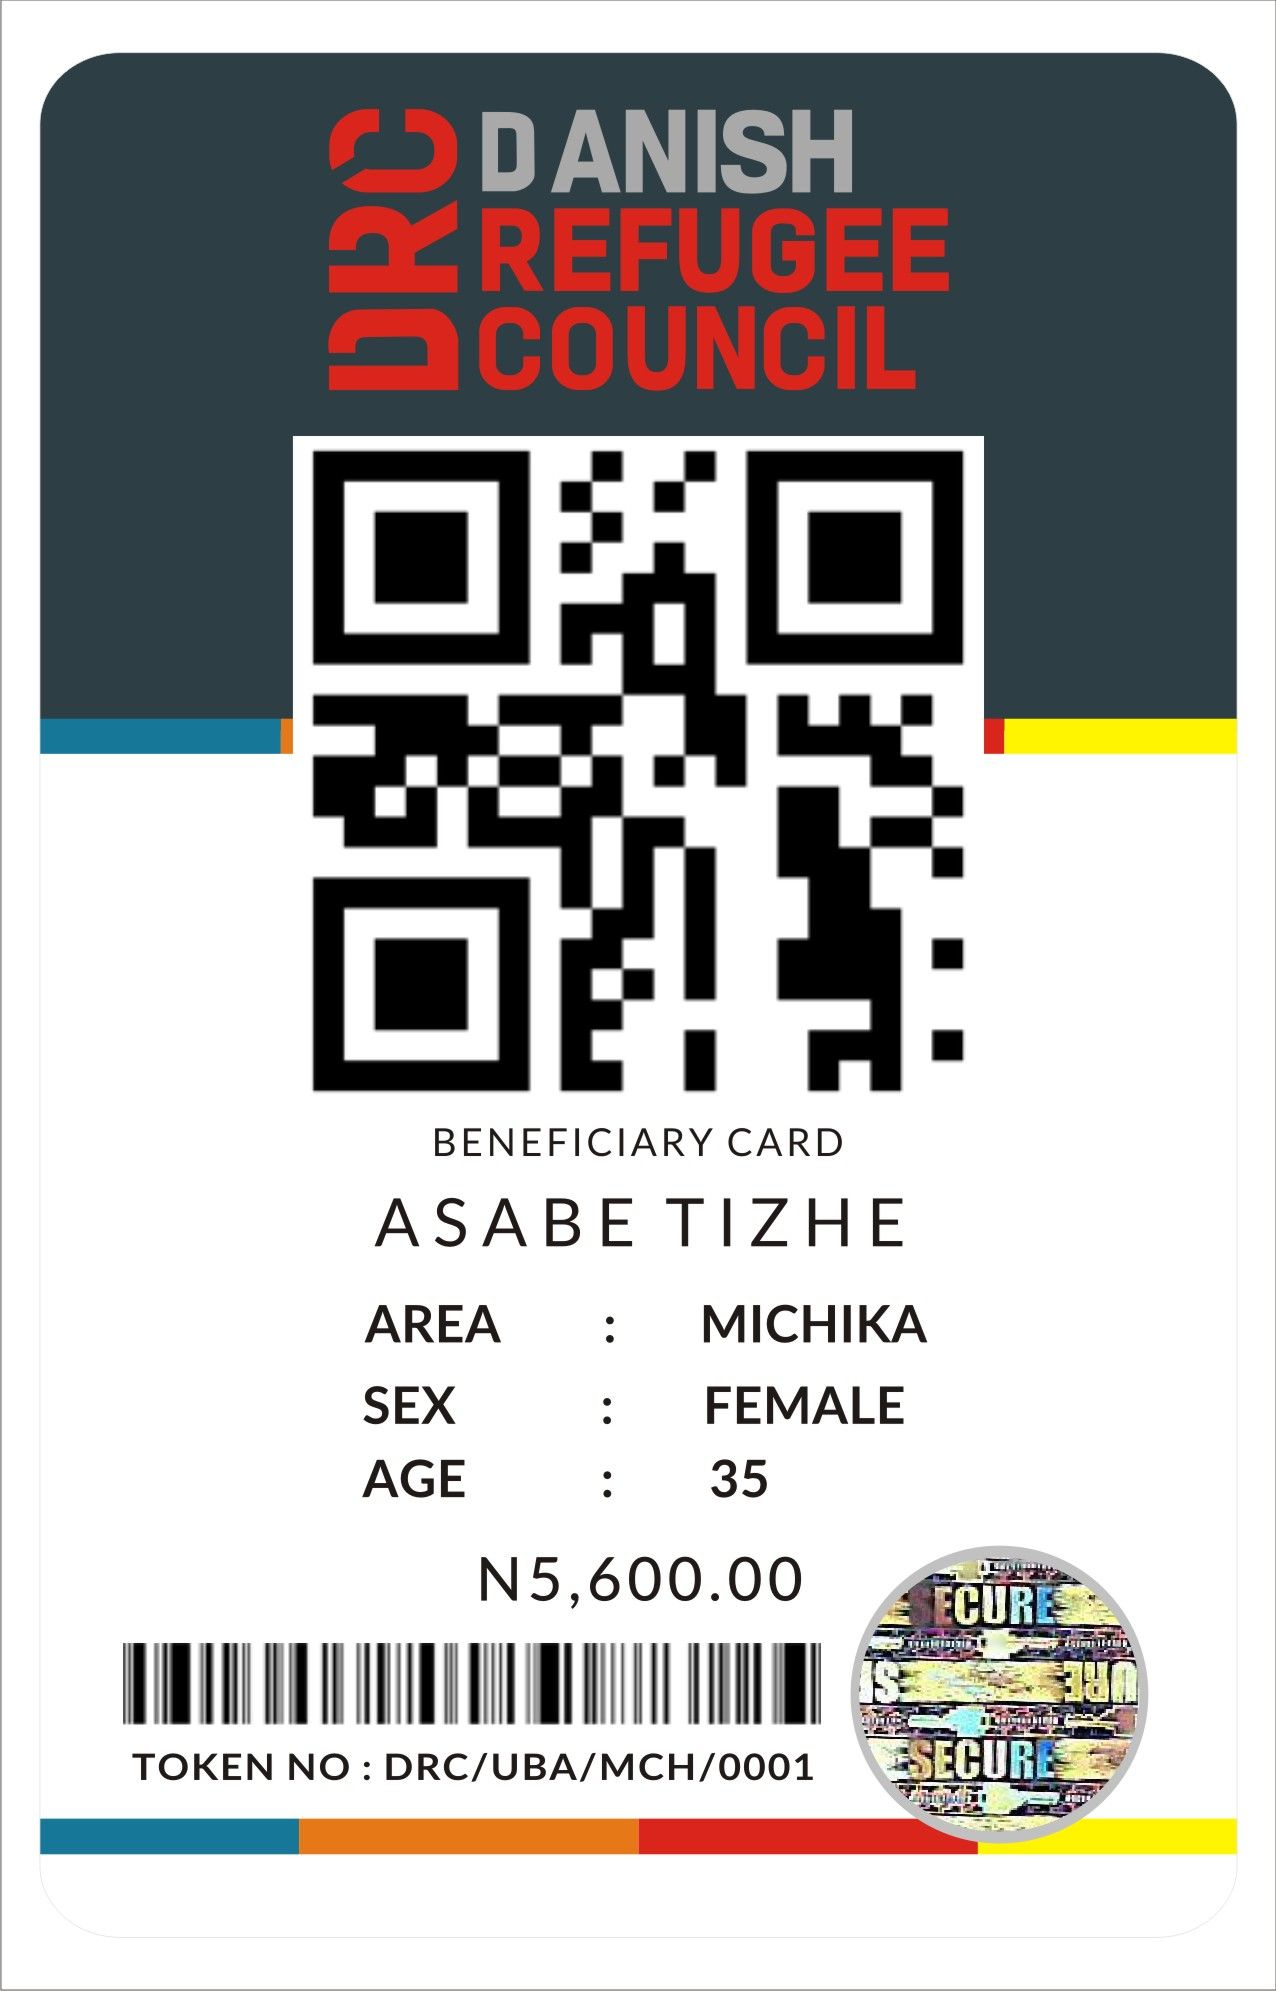 CALL EMMANUEL ON 08176499649 TO PRINT QR CODE, BAR CODE, AUTHENTICATION LABELS, STICKERS ETC